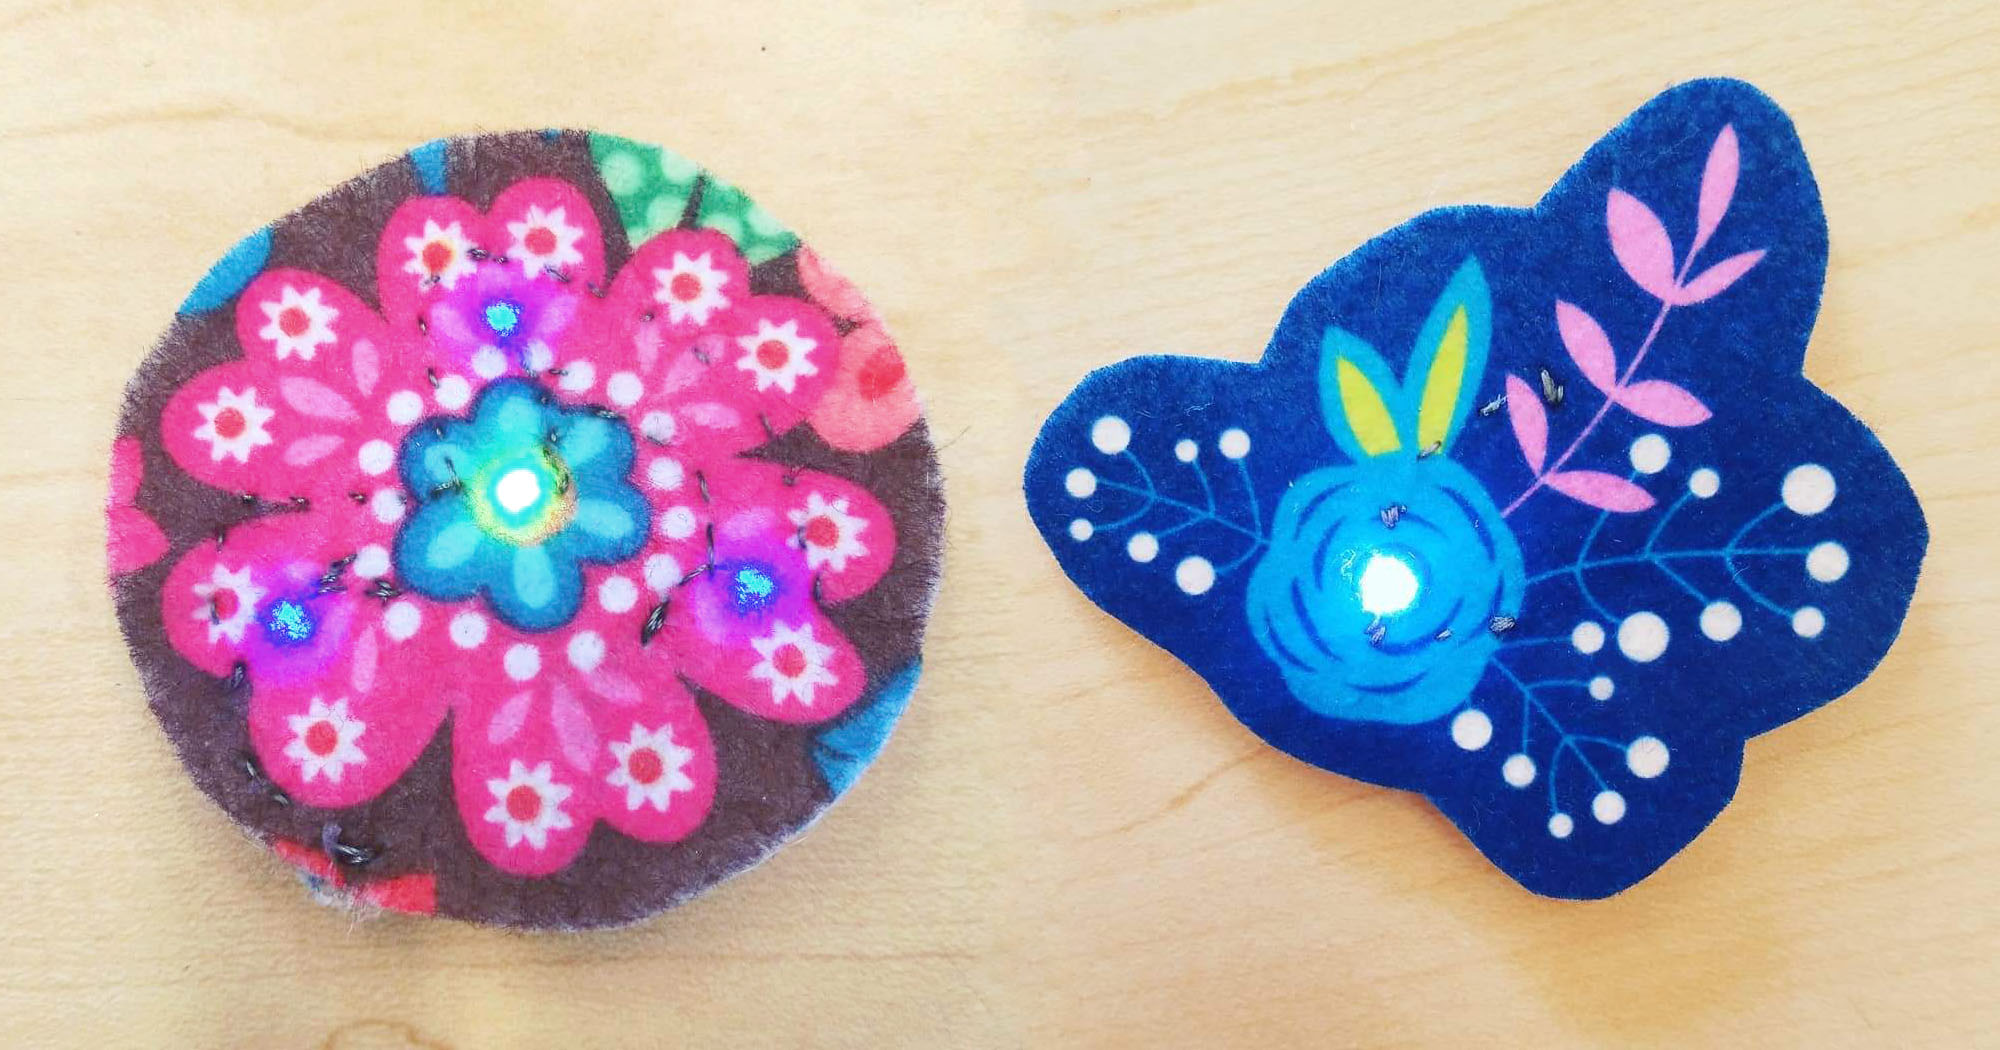 Colorful felt flowers with glowing centers made using conductive thread and LEDs